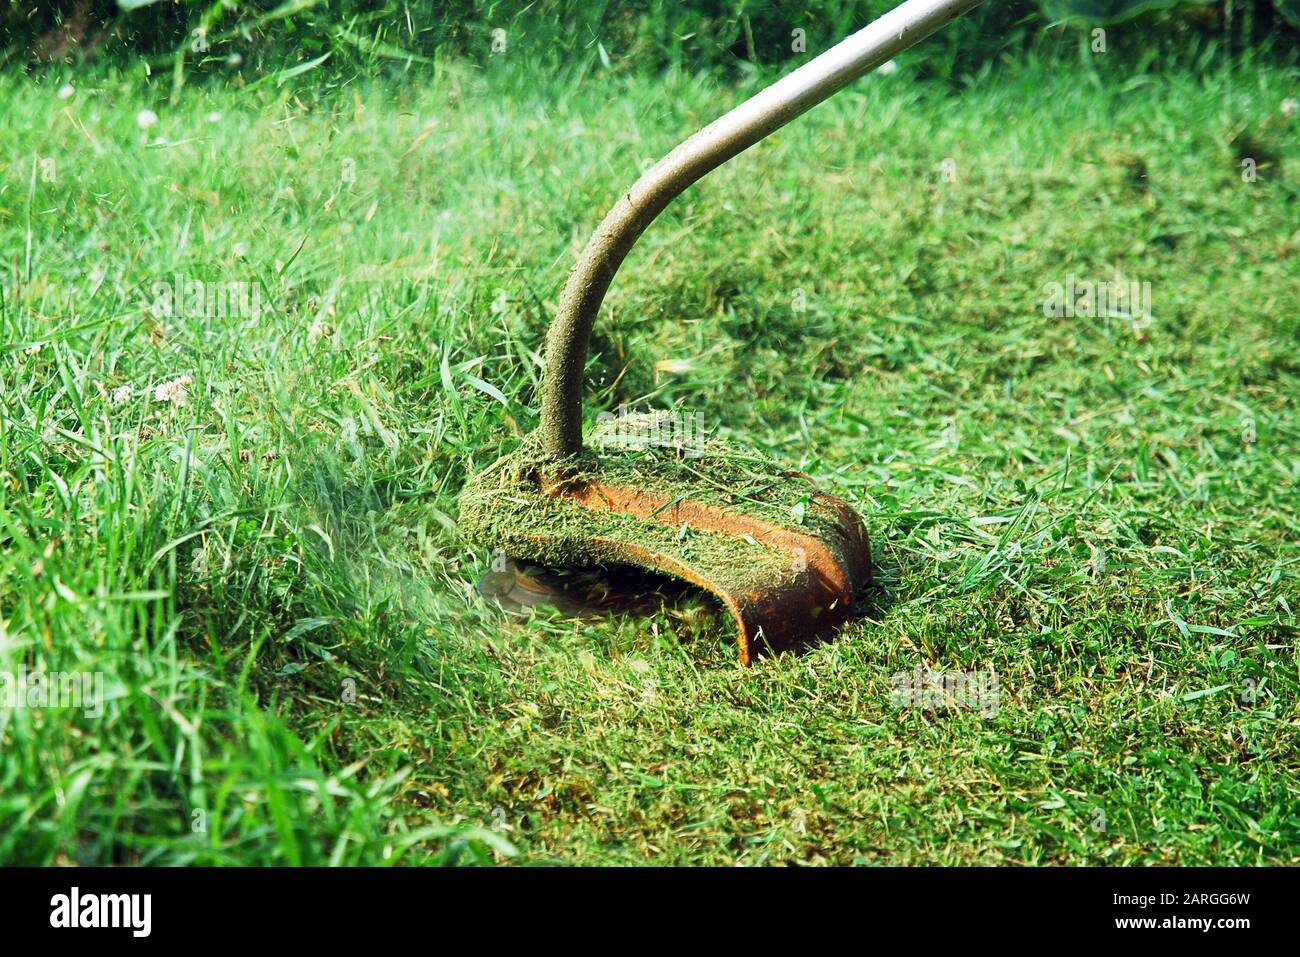 Hand held grass trimmer mowing green lawn. Grass shreds flying around the gardening tool. Stock Photo